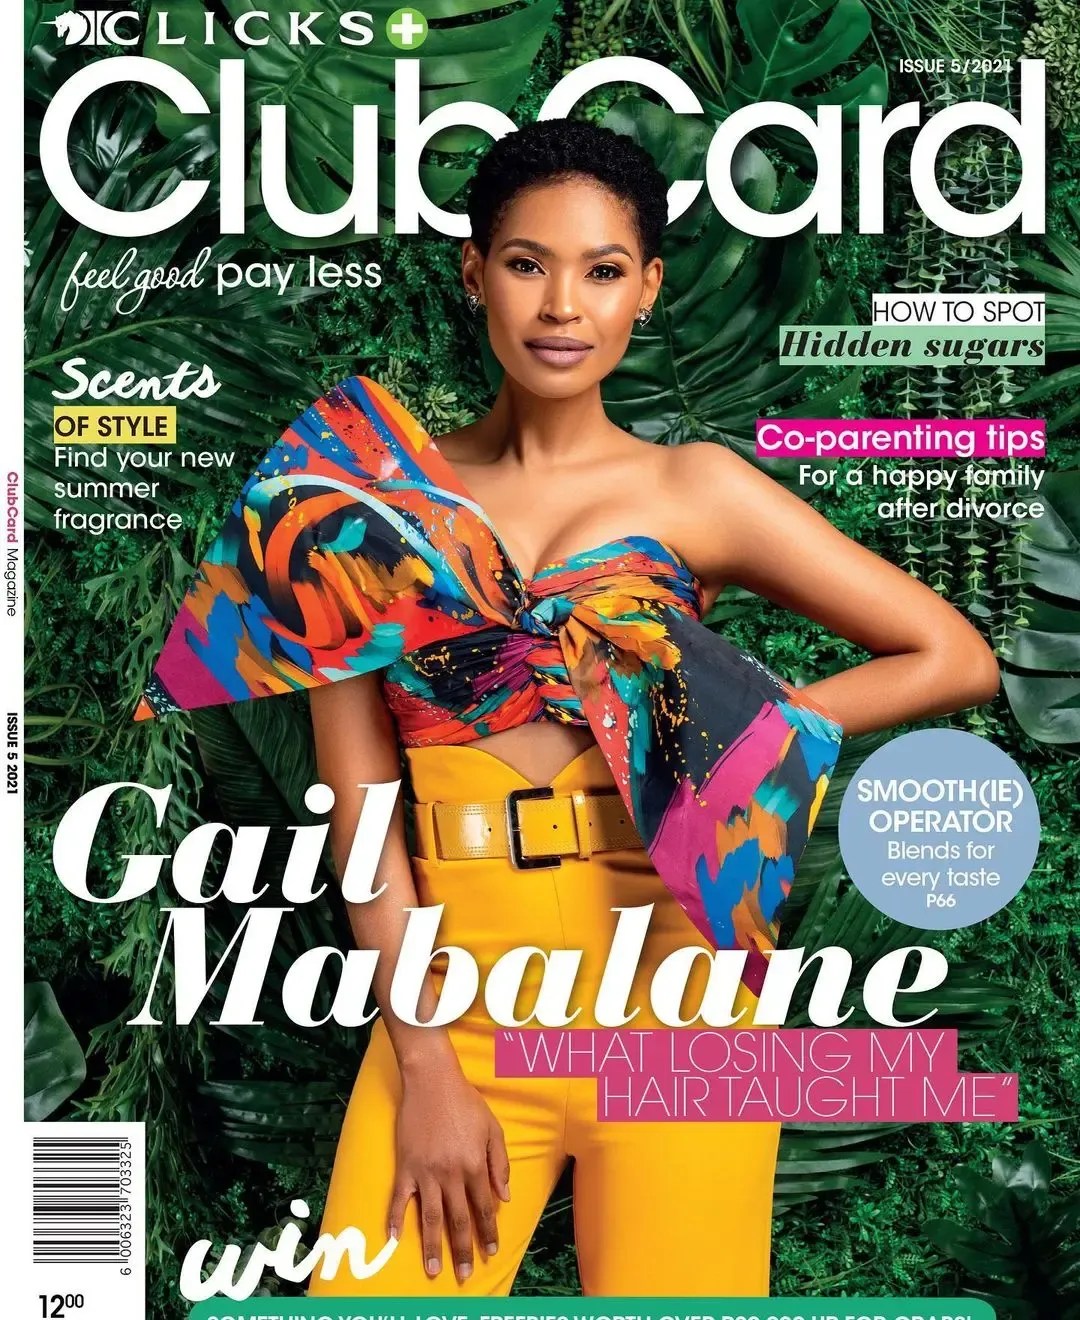 Gail Mabalane graces the cover of Clicks Club magazine